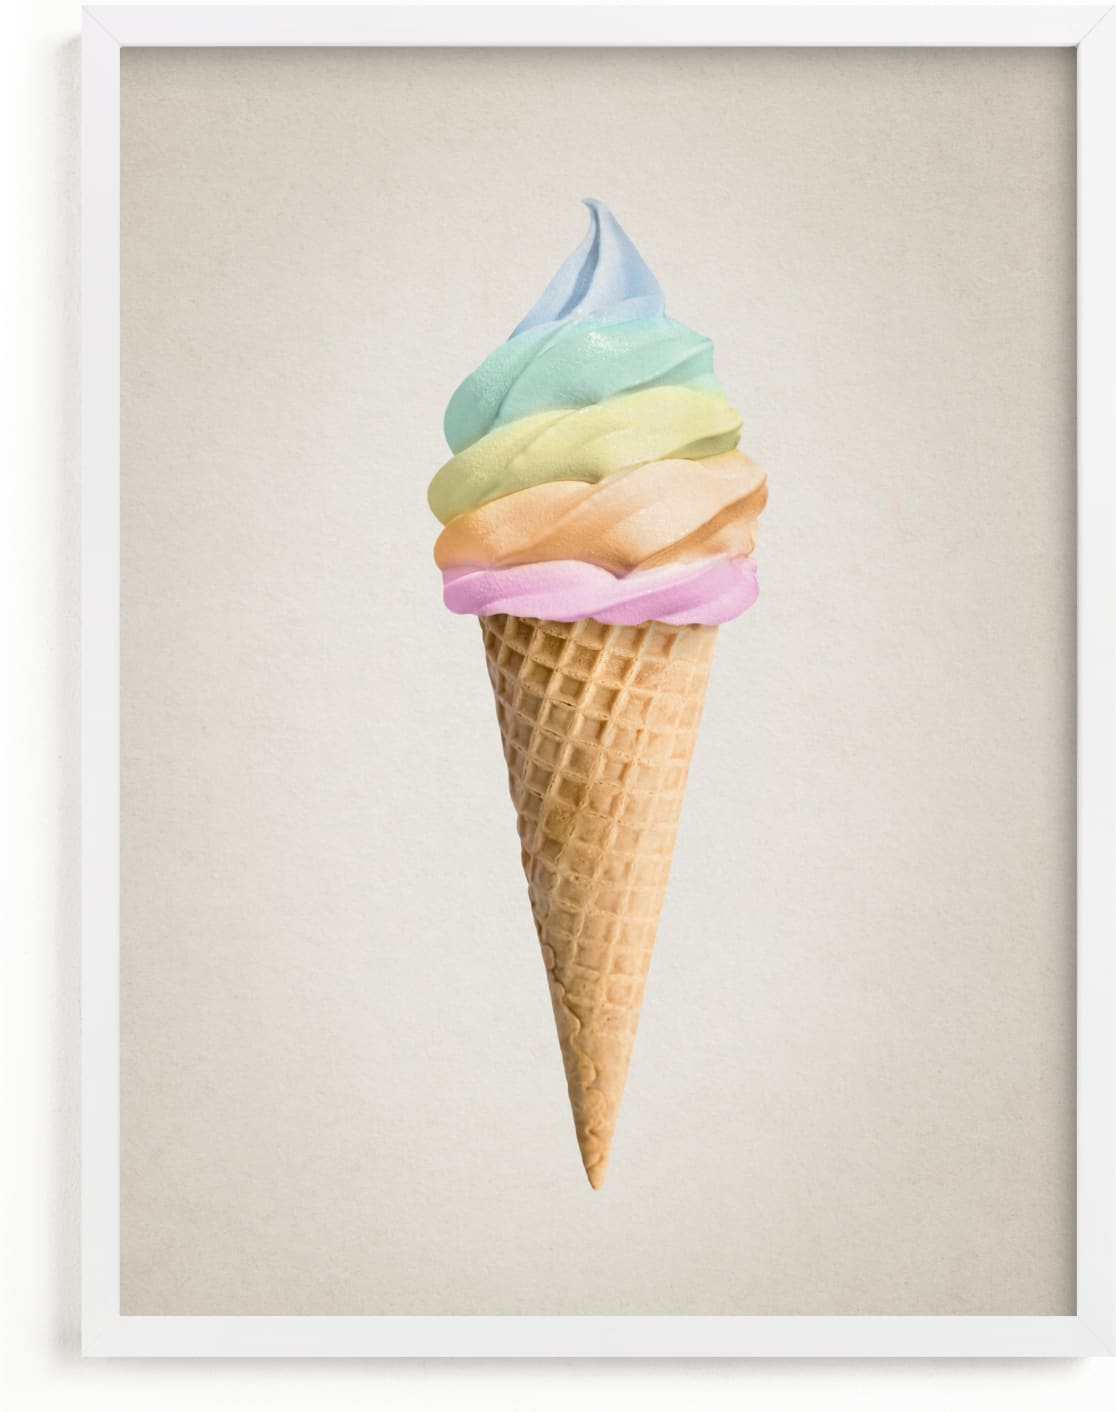 This is a colorful art by Paola Benenati called Rainbow Ice Cream.